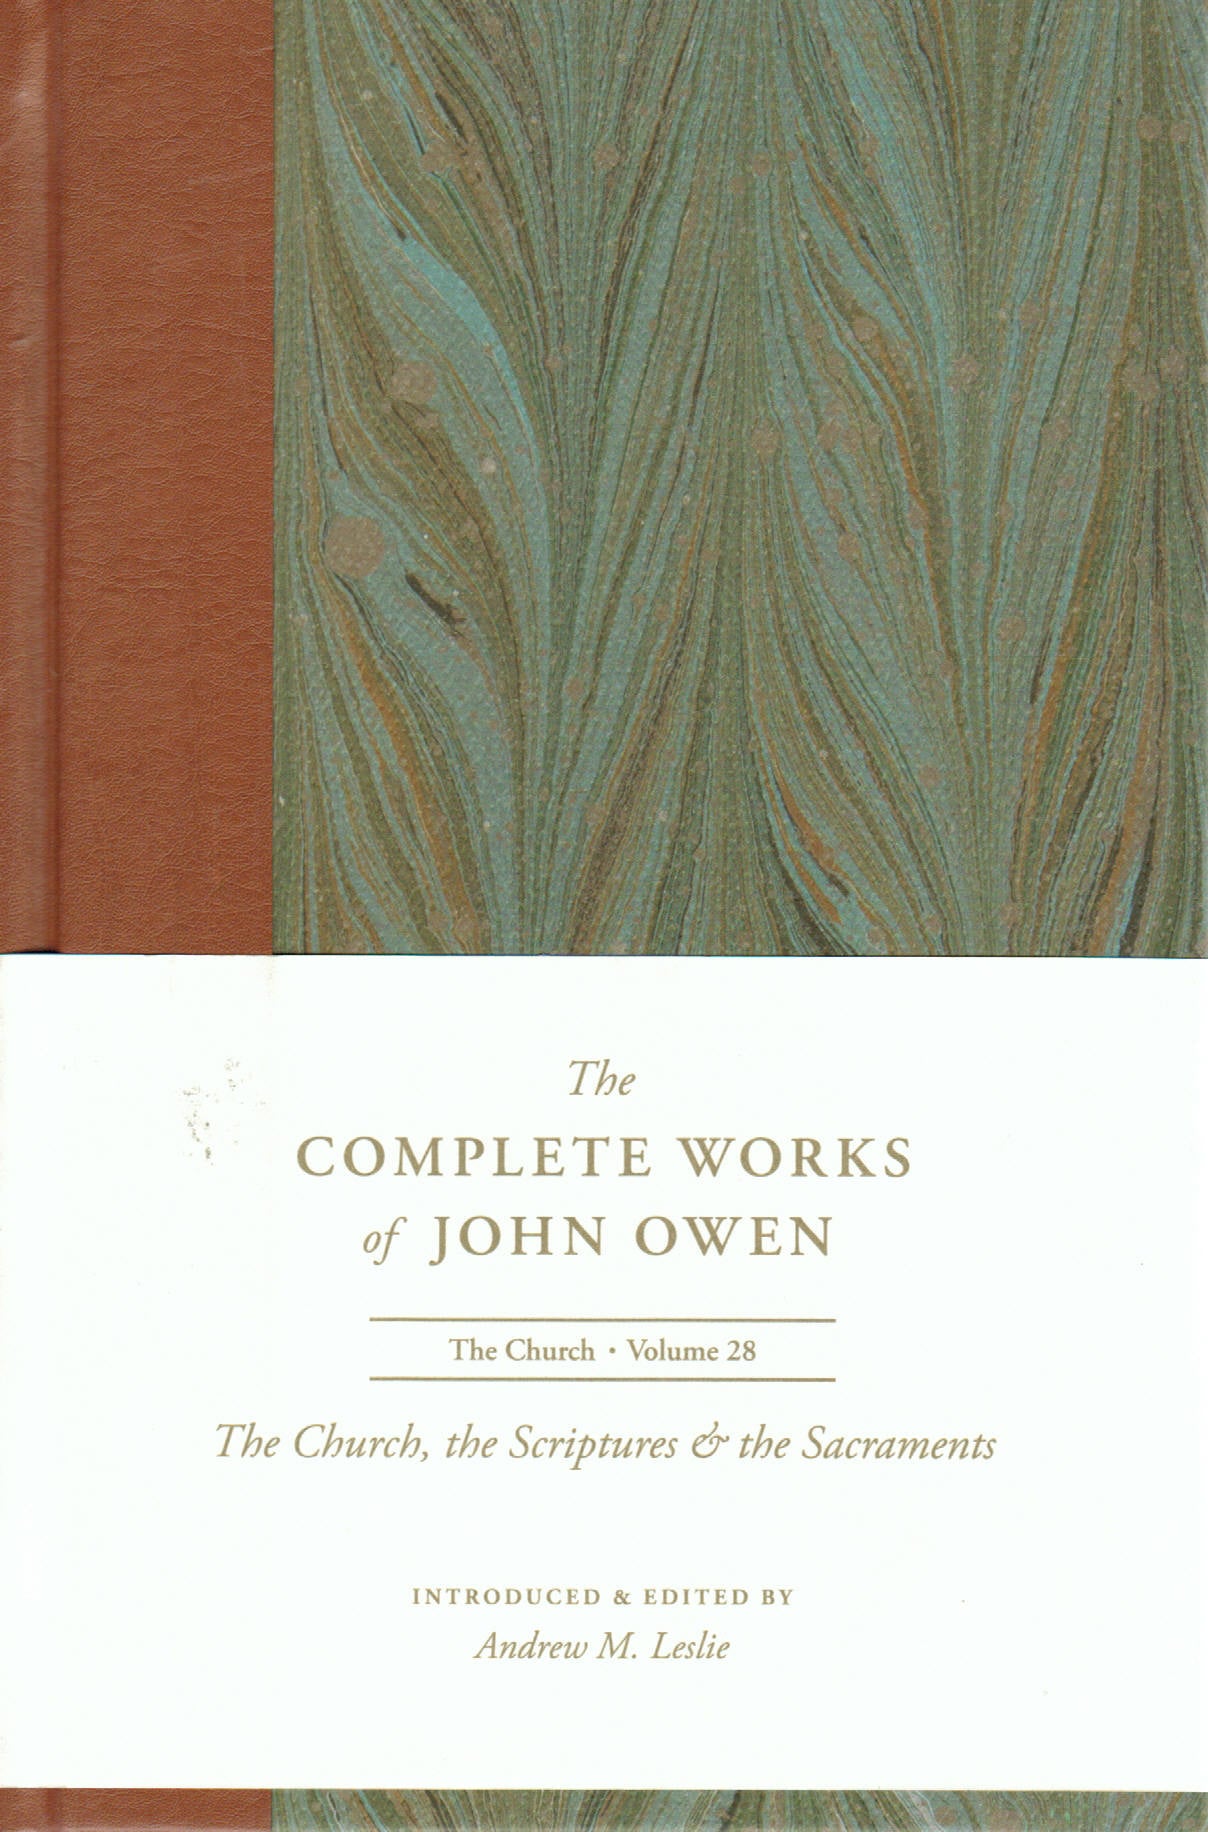 The Complete Works of John Owen [Updated] - Volume 28: The Church, the Scriptures, and the Sacraments